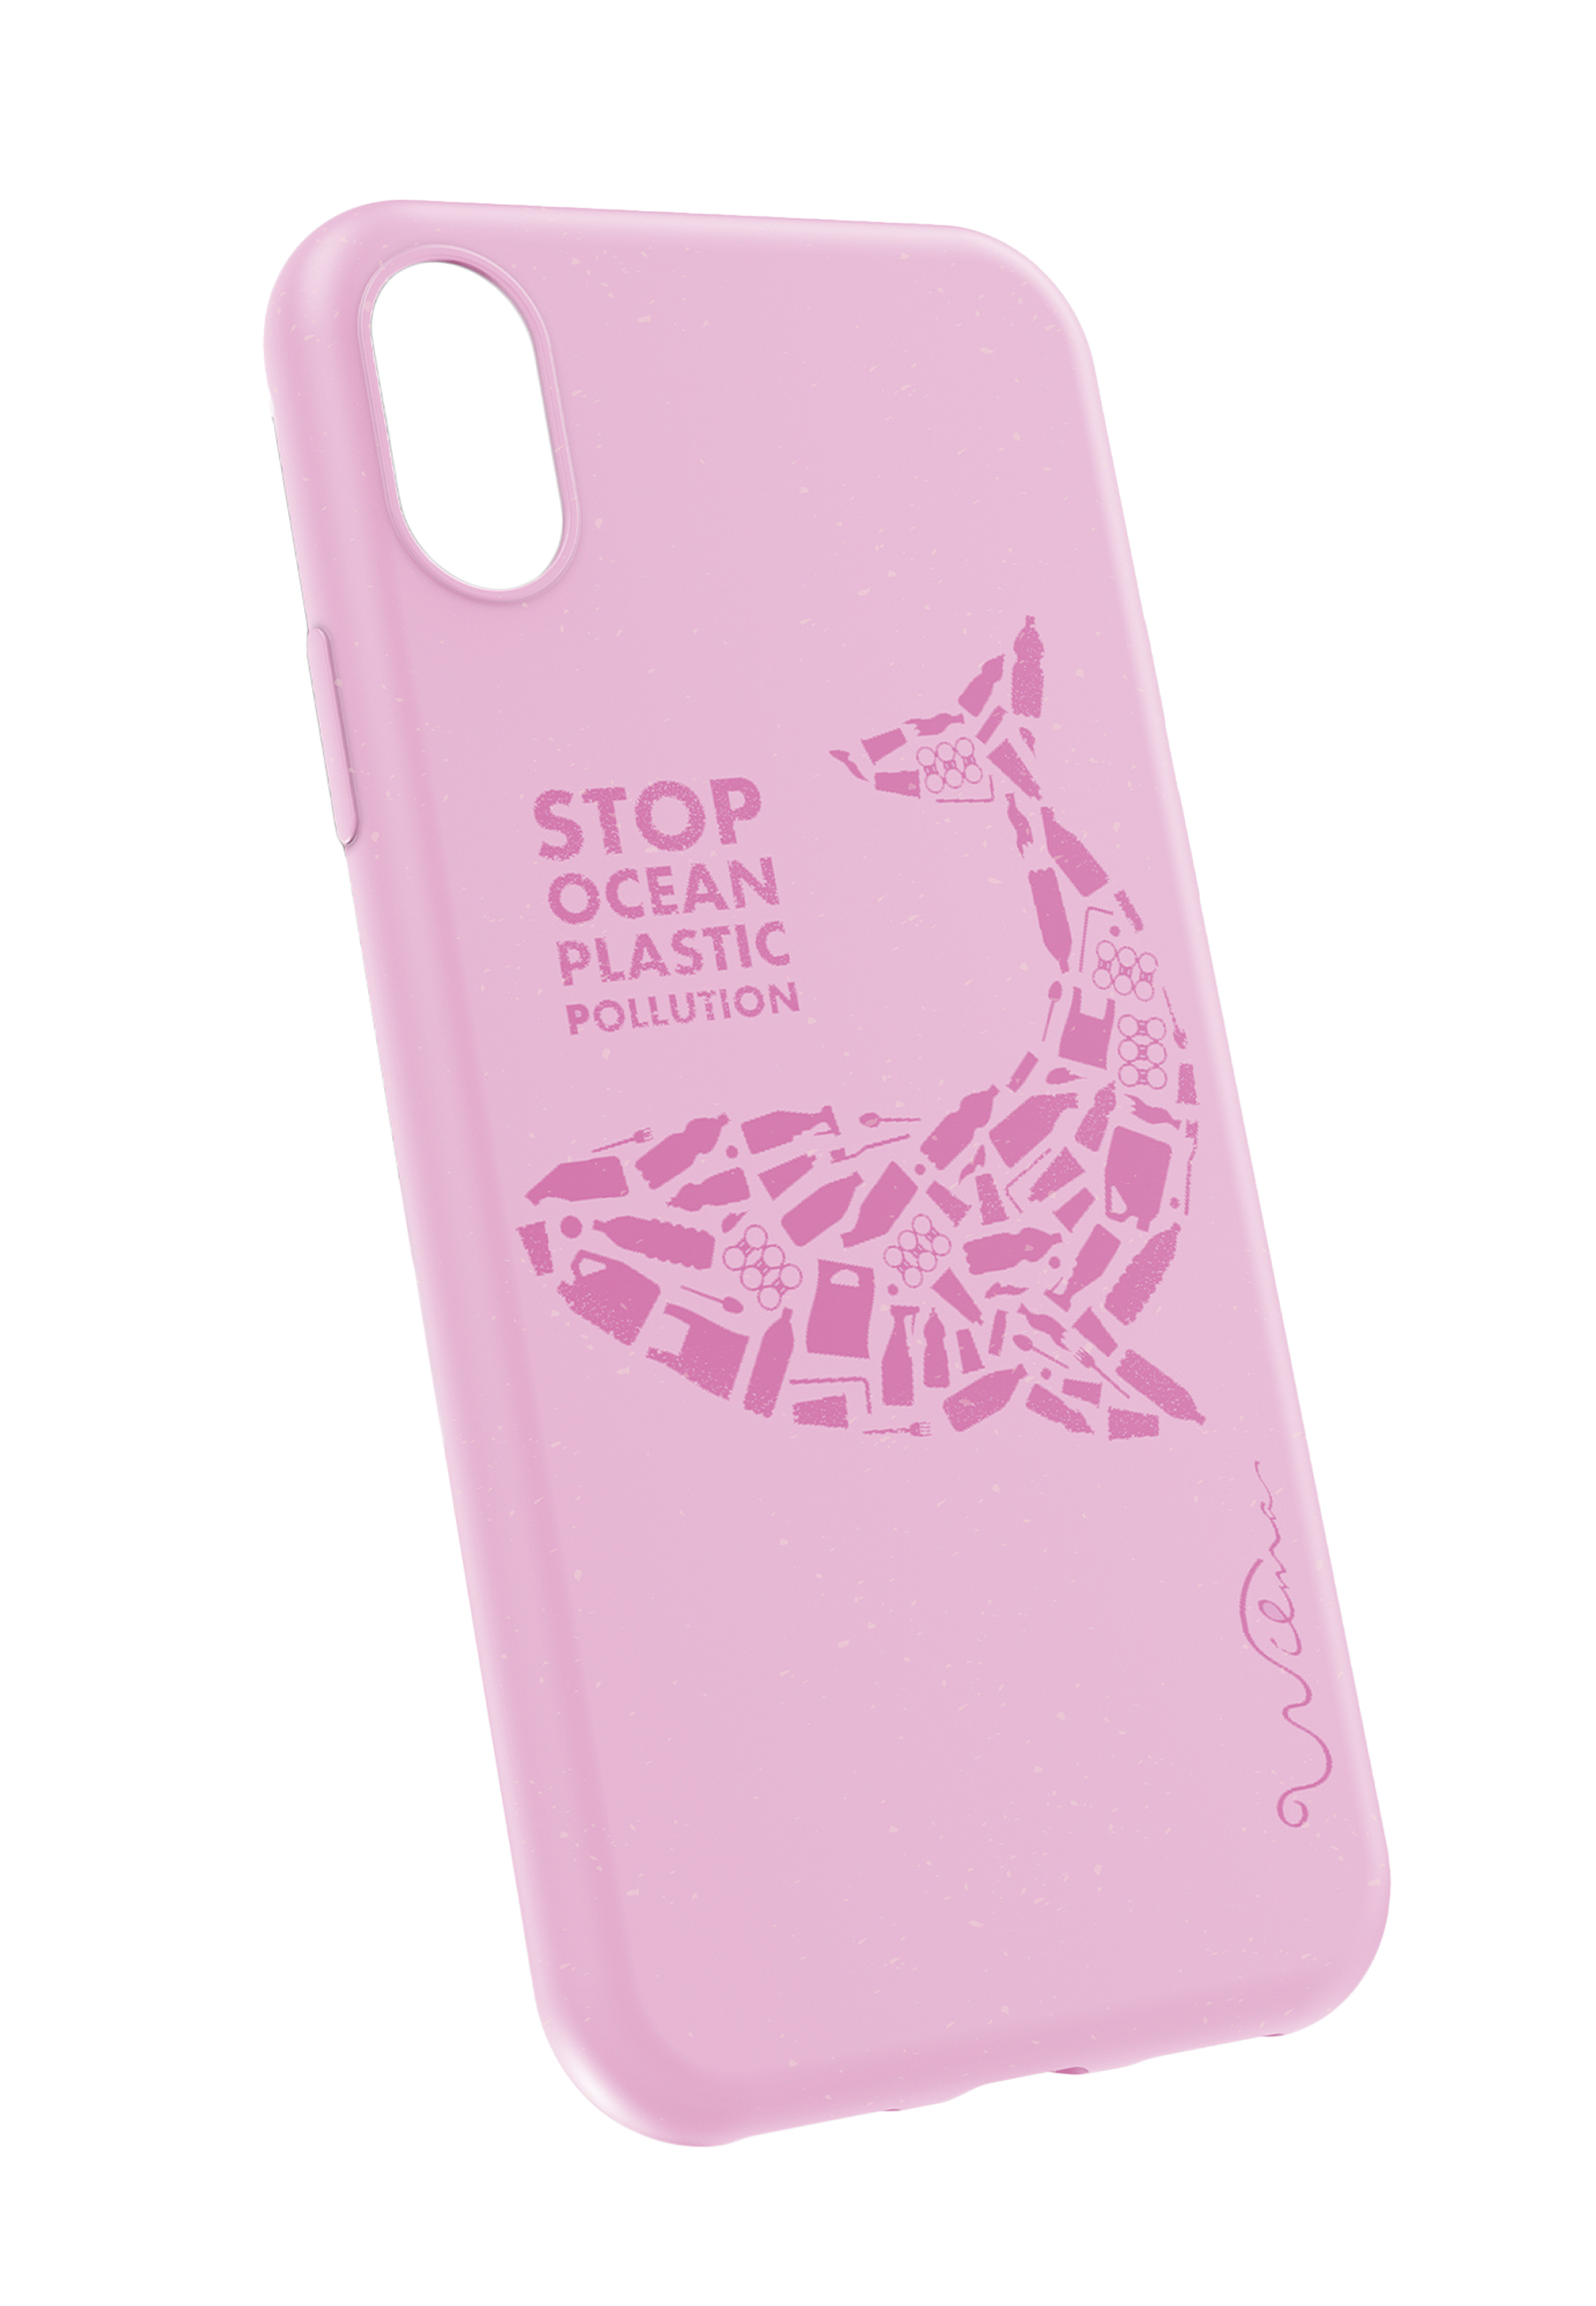 ECO FASHION BY pink Apple, iPhone X/XS, Backcover, RIPXS, WILMA